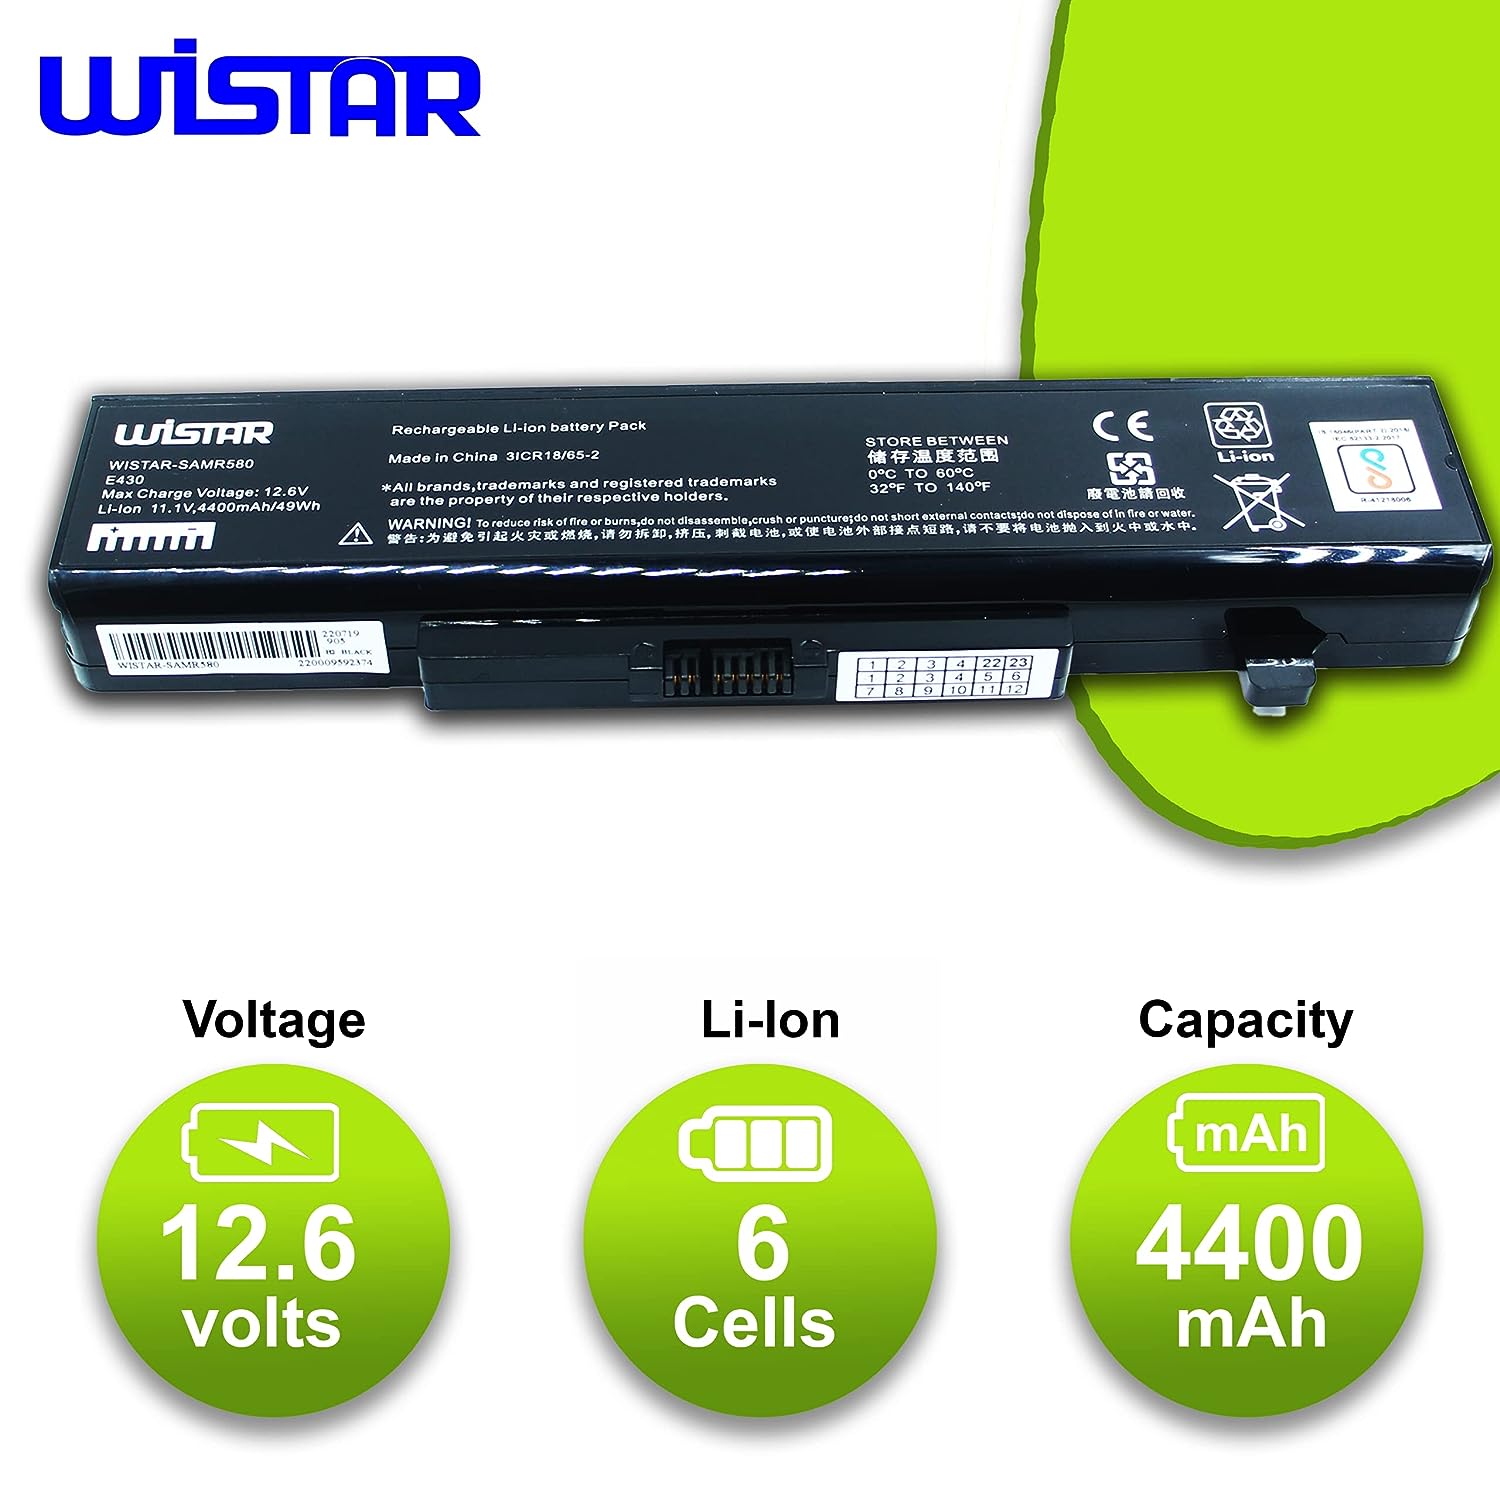 WISTAR B590 E530 E540 Laptop Battery Replacement for 0A36311 Lenovo ThinkPad E430 E431 E435 E440 E445 E531 E535 E545; P/N: 45N1048 45N1049 45N1043 45N1042